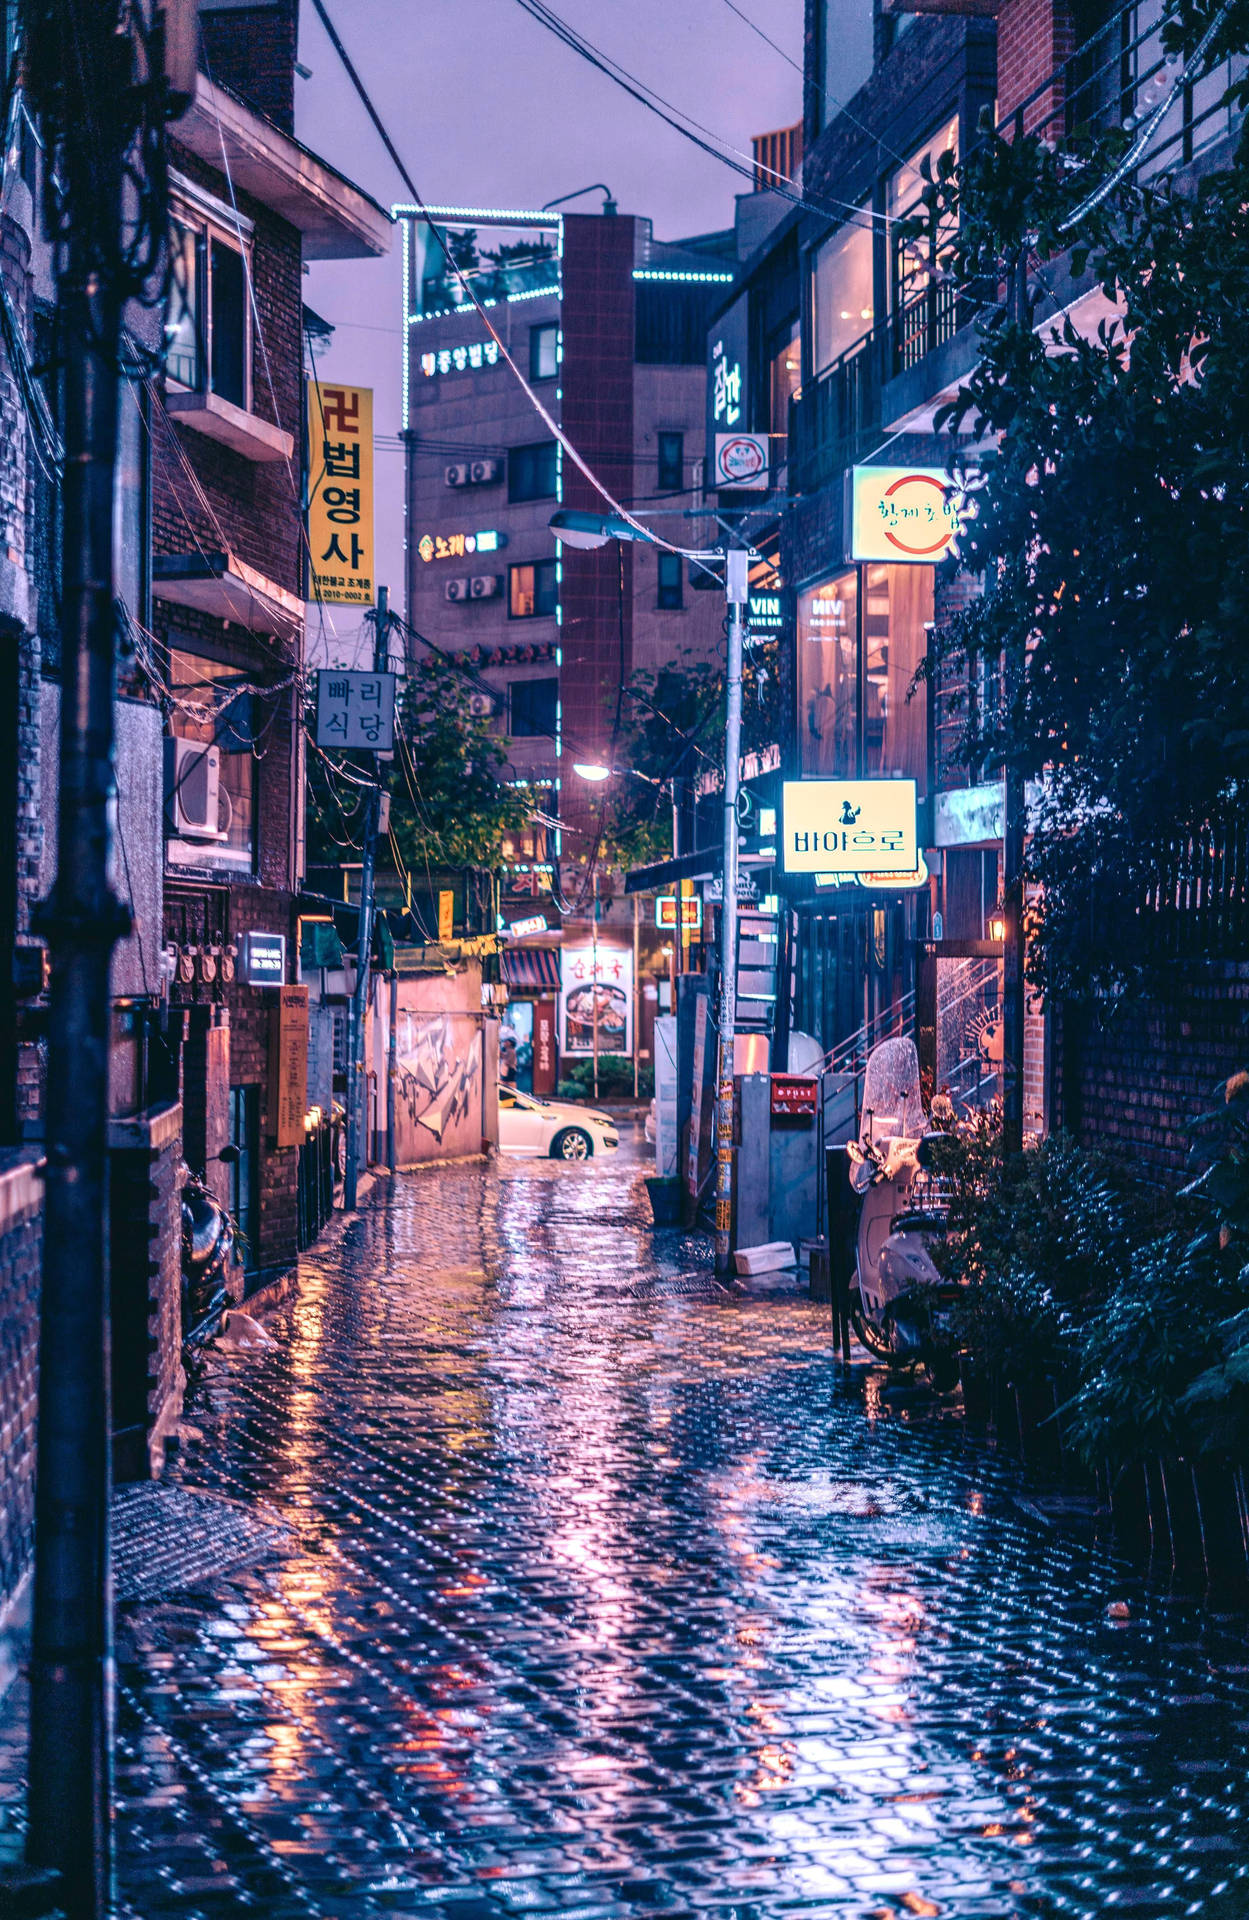 A Glimpse Of Serenity: Korean Aesthetic In A Wet Street Scene Background